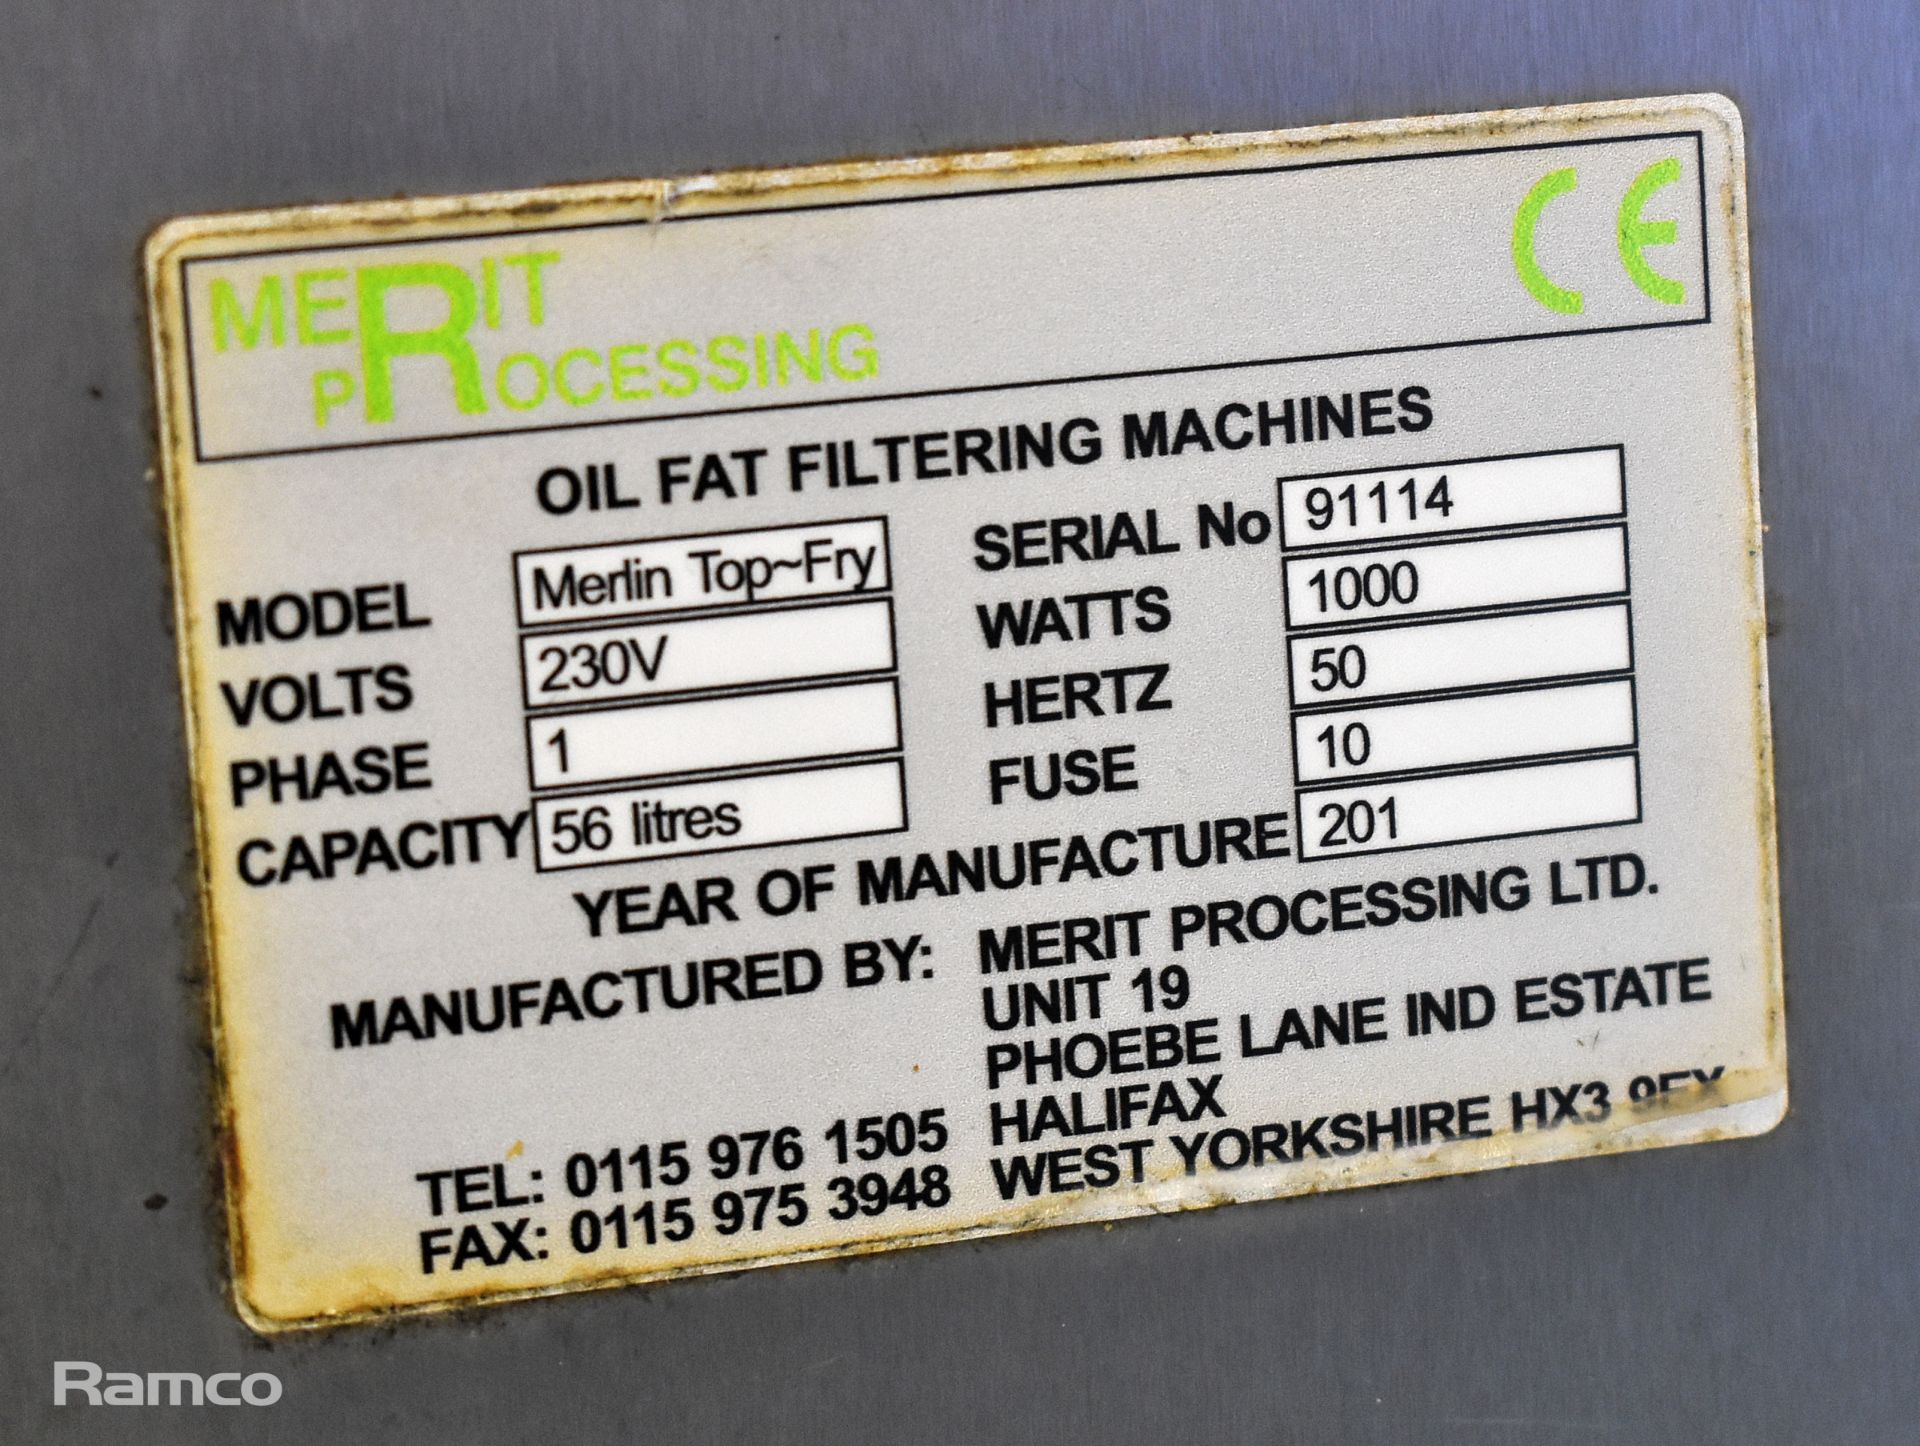 Merlin Filtration Top Fry stainless steel oil fat filter machine - Image 5 of 5